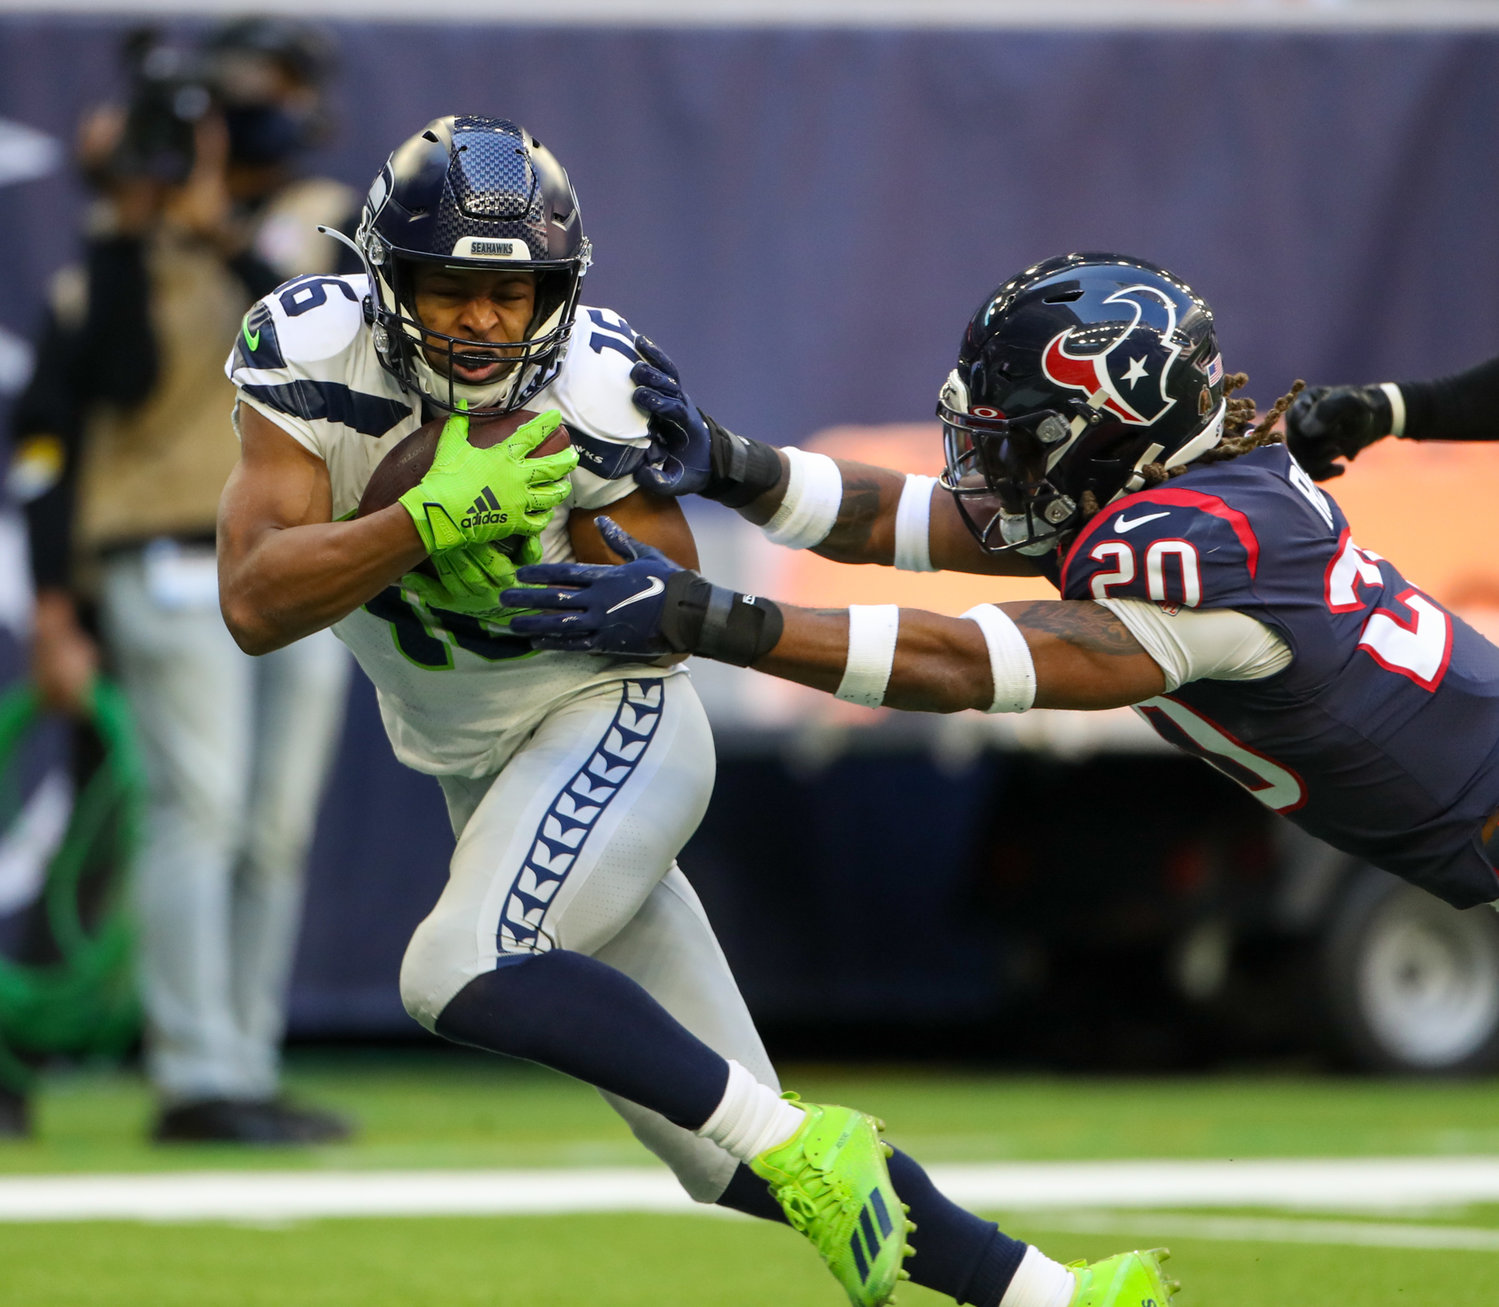 Seattle Seahawks wide receiver Tyler Lockett (16) brings in a touchdown pass over Houston Texans safety Justin Reid (20) during the first half of an NFL game between the Seahawks and the Texans on December 12, 2021 in Houston, Texas.